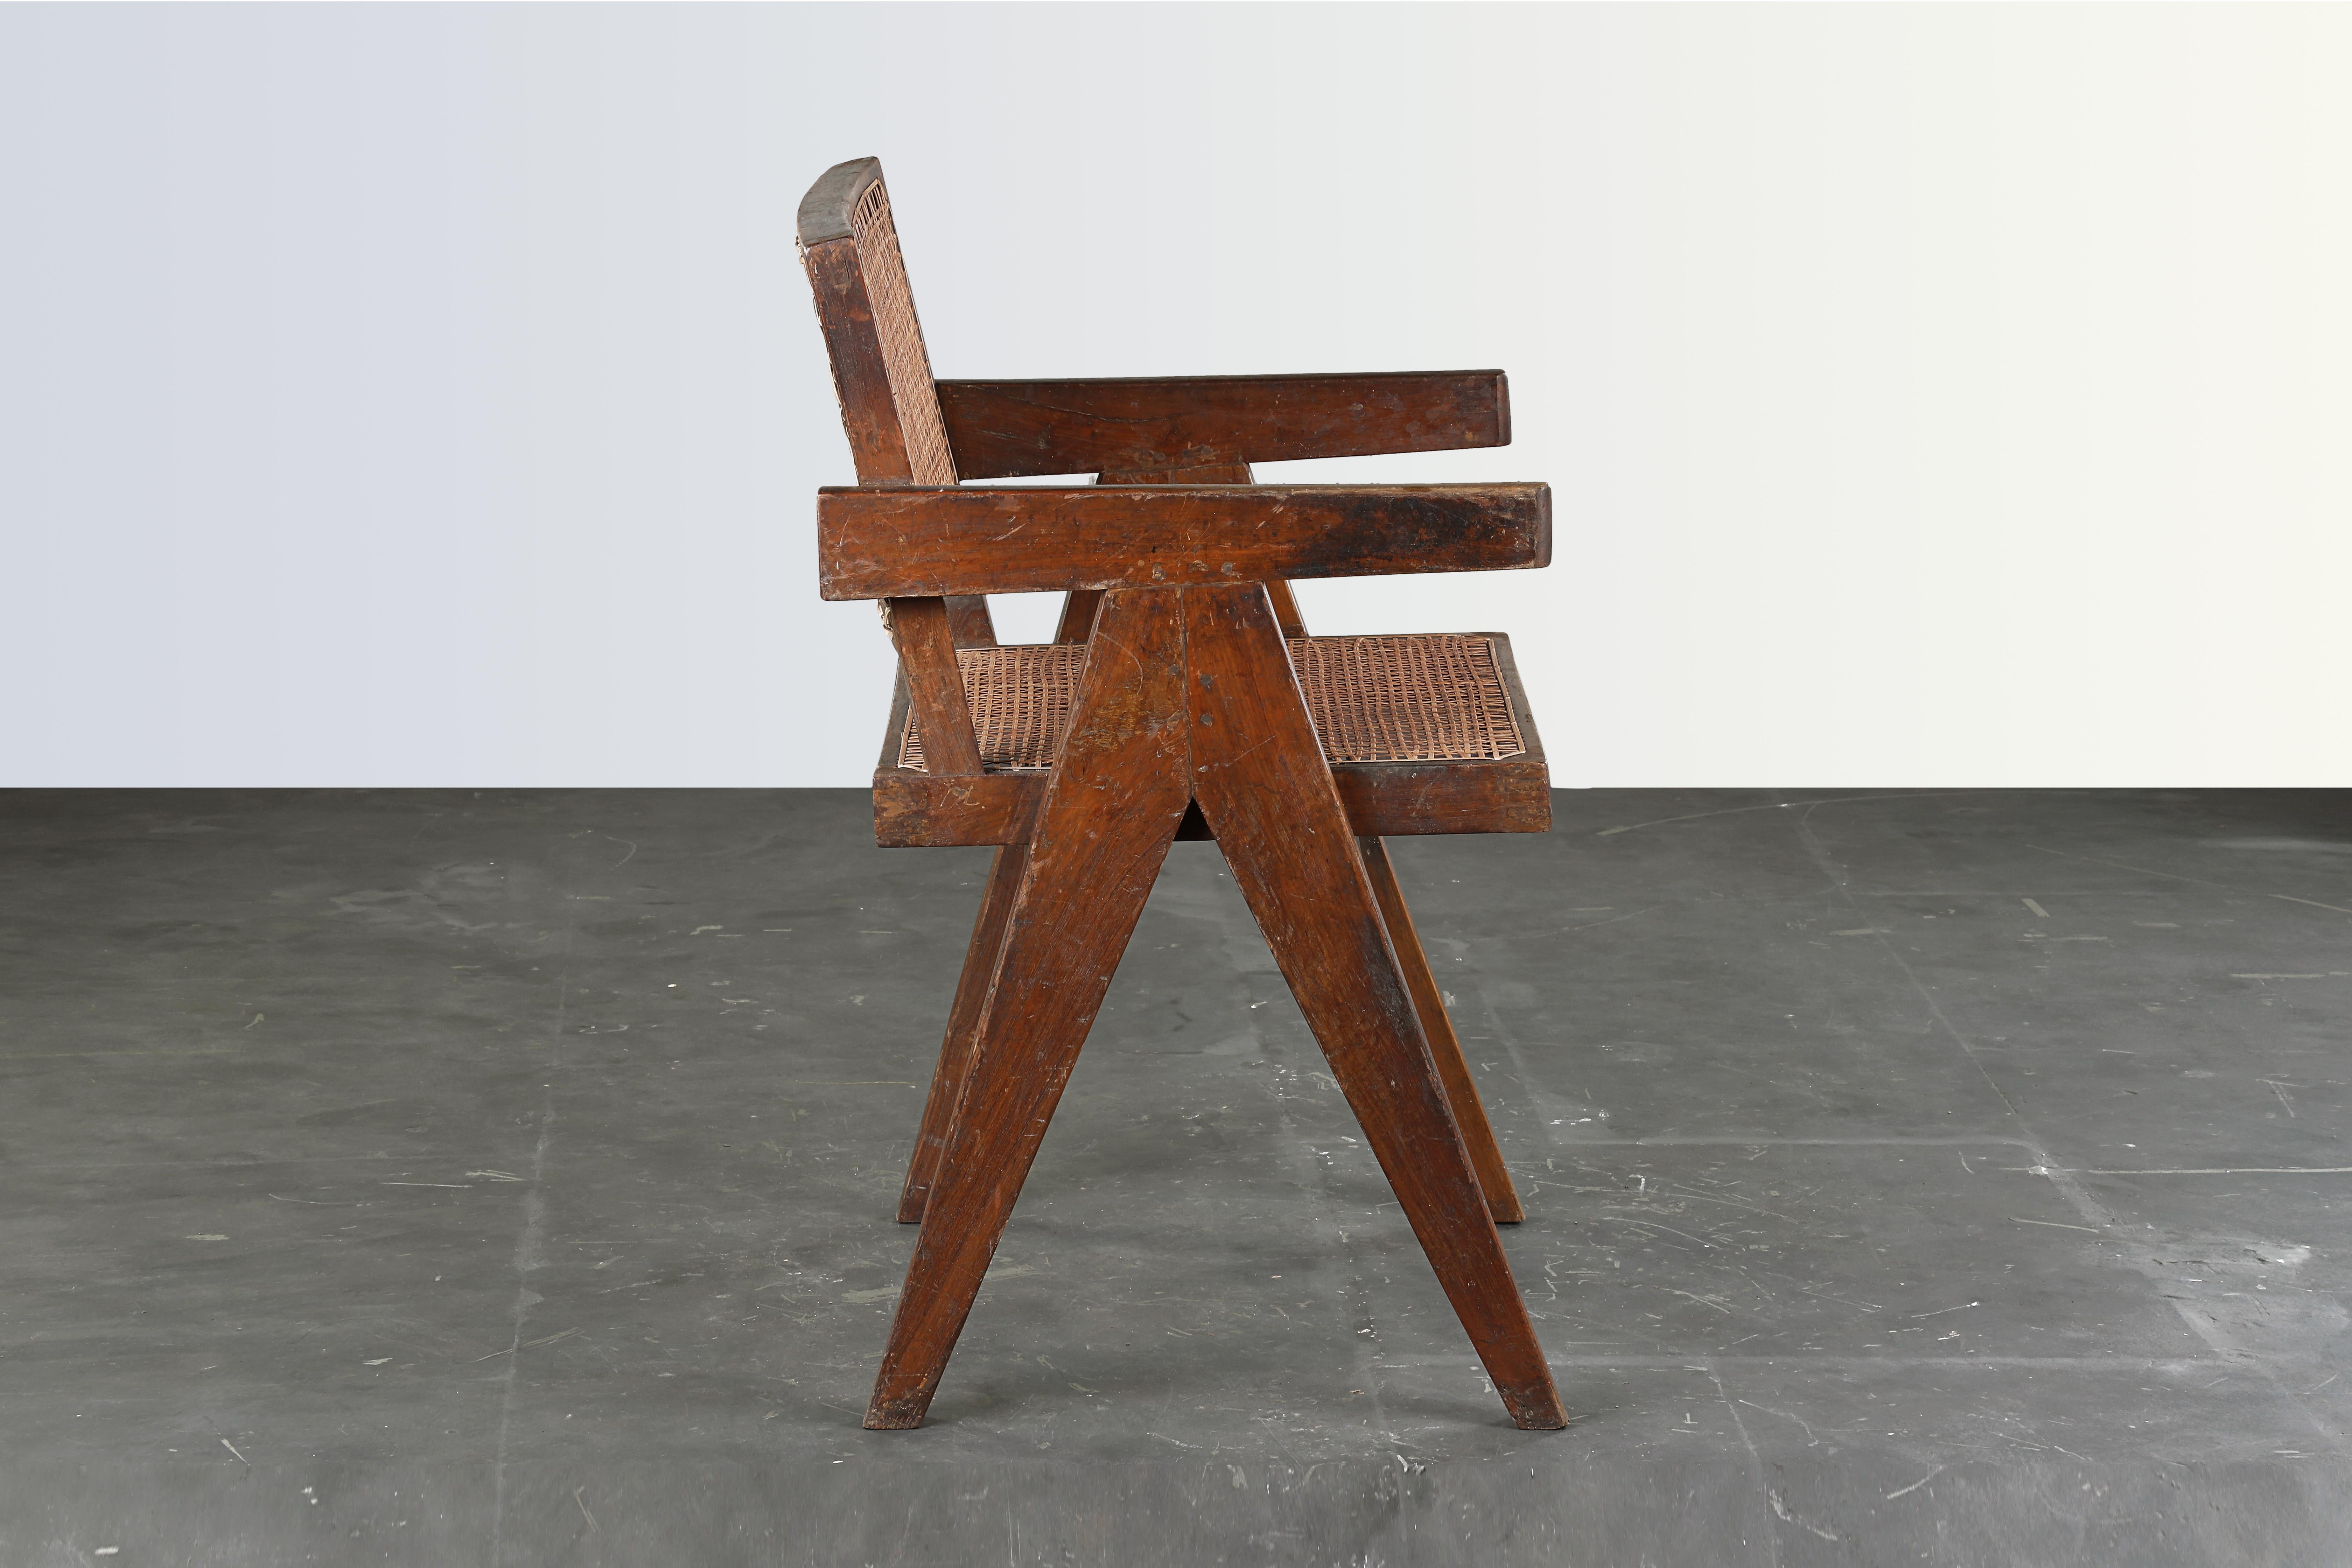 They have a patinated teak, which gives that chairs a strong character, showing all that traces of age and its uniqueness. They are finally historical pieces from an UNESCO World Heritage site, done by the most important architects from the 20th